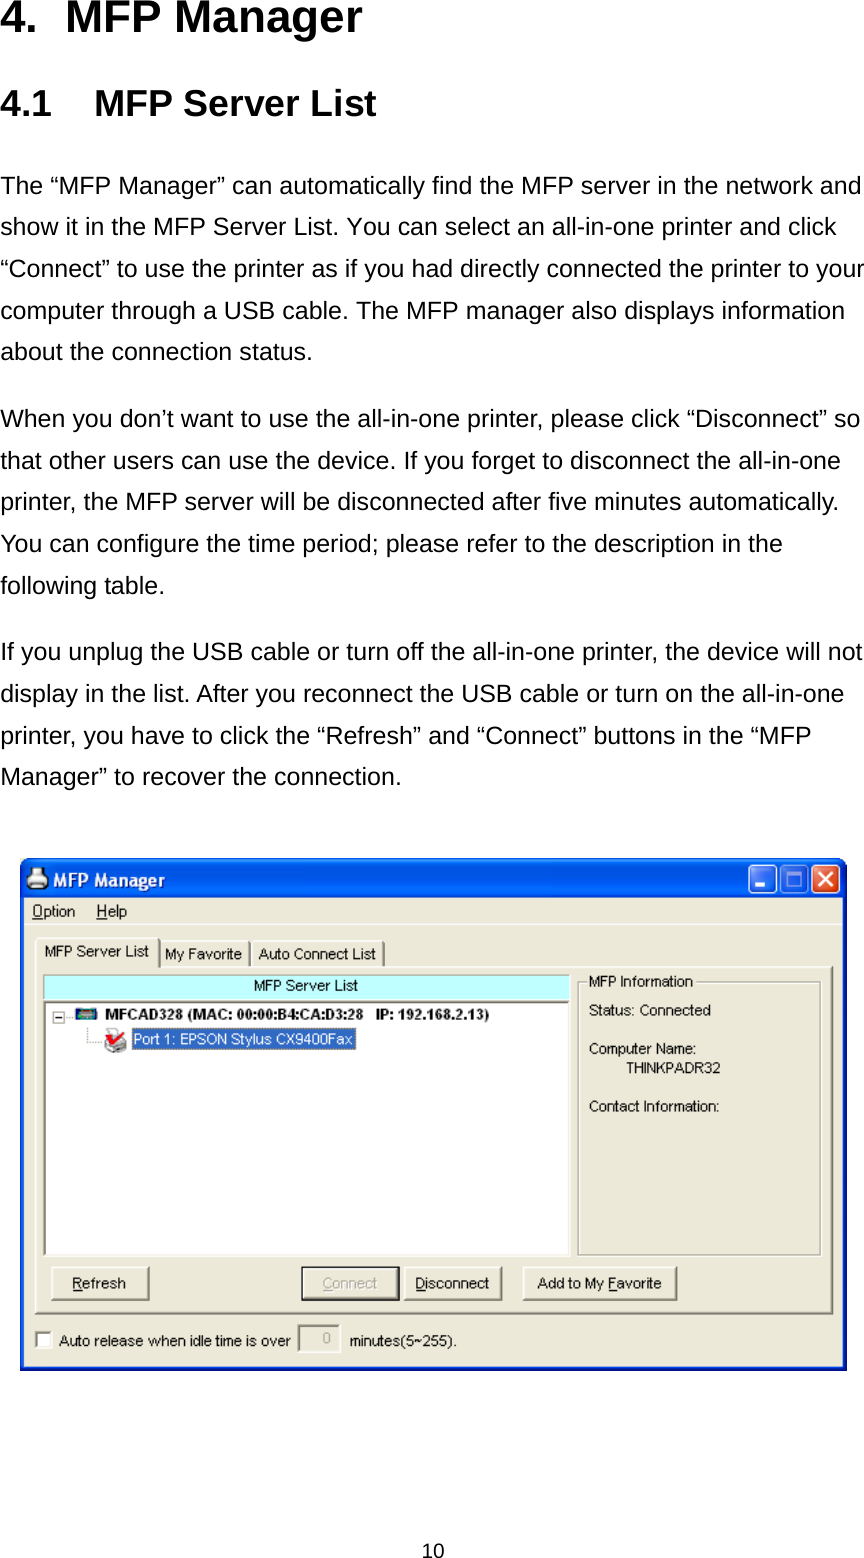 10 4. MFP Manager 4.1  MFP Server List The “MFP Manager” can automatically find the MFP server in the network and show it in the MFP Server List. You can select an all-in-one printer and click “Connect” to use the printer as if you had directly connected the printer to your computer through a USB cable. The MFP manager also displays information about the connection status. When you don’t want to use the all-in-one printer, please click “Disconnect” so that other users can use the device. If you forget to disconnect the all-in-one printer, the MFP server will be disconnected after five minutes automatically. You can configure the time period; please refer to the description in the following table. If you unplug the USB cable or turn off the all-in-one printer, the device will not display in the list. After you reconnect the USB cable or turn on the all-in-one printer, you have to click the “Refresh” and “Connect” buttons in the “MFP Manager” to recover the connection.      